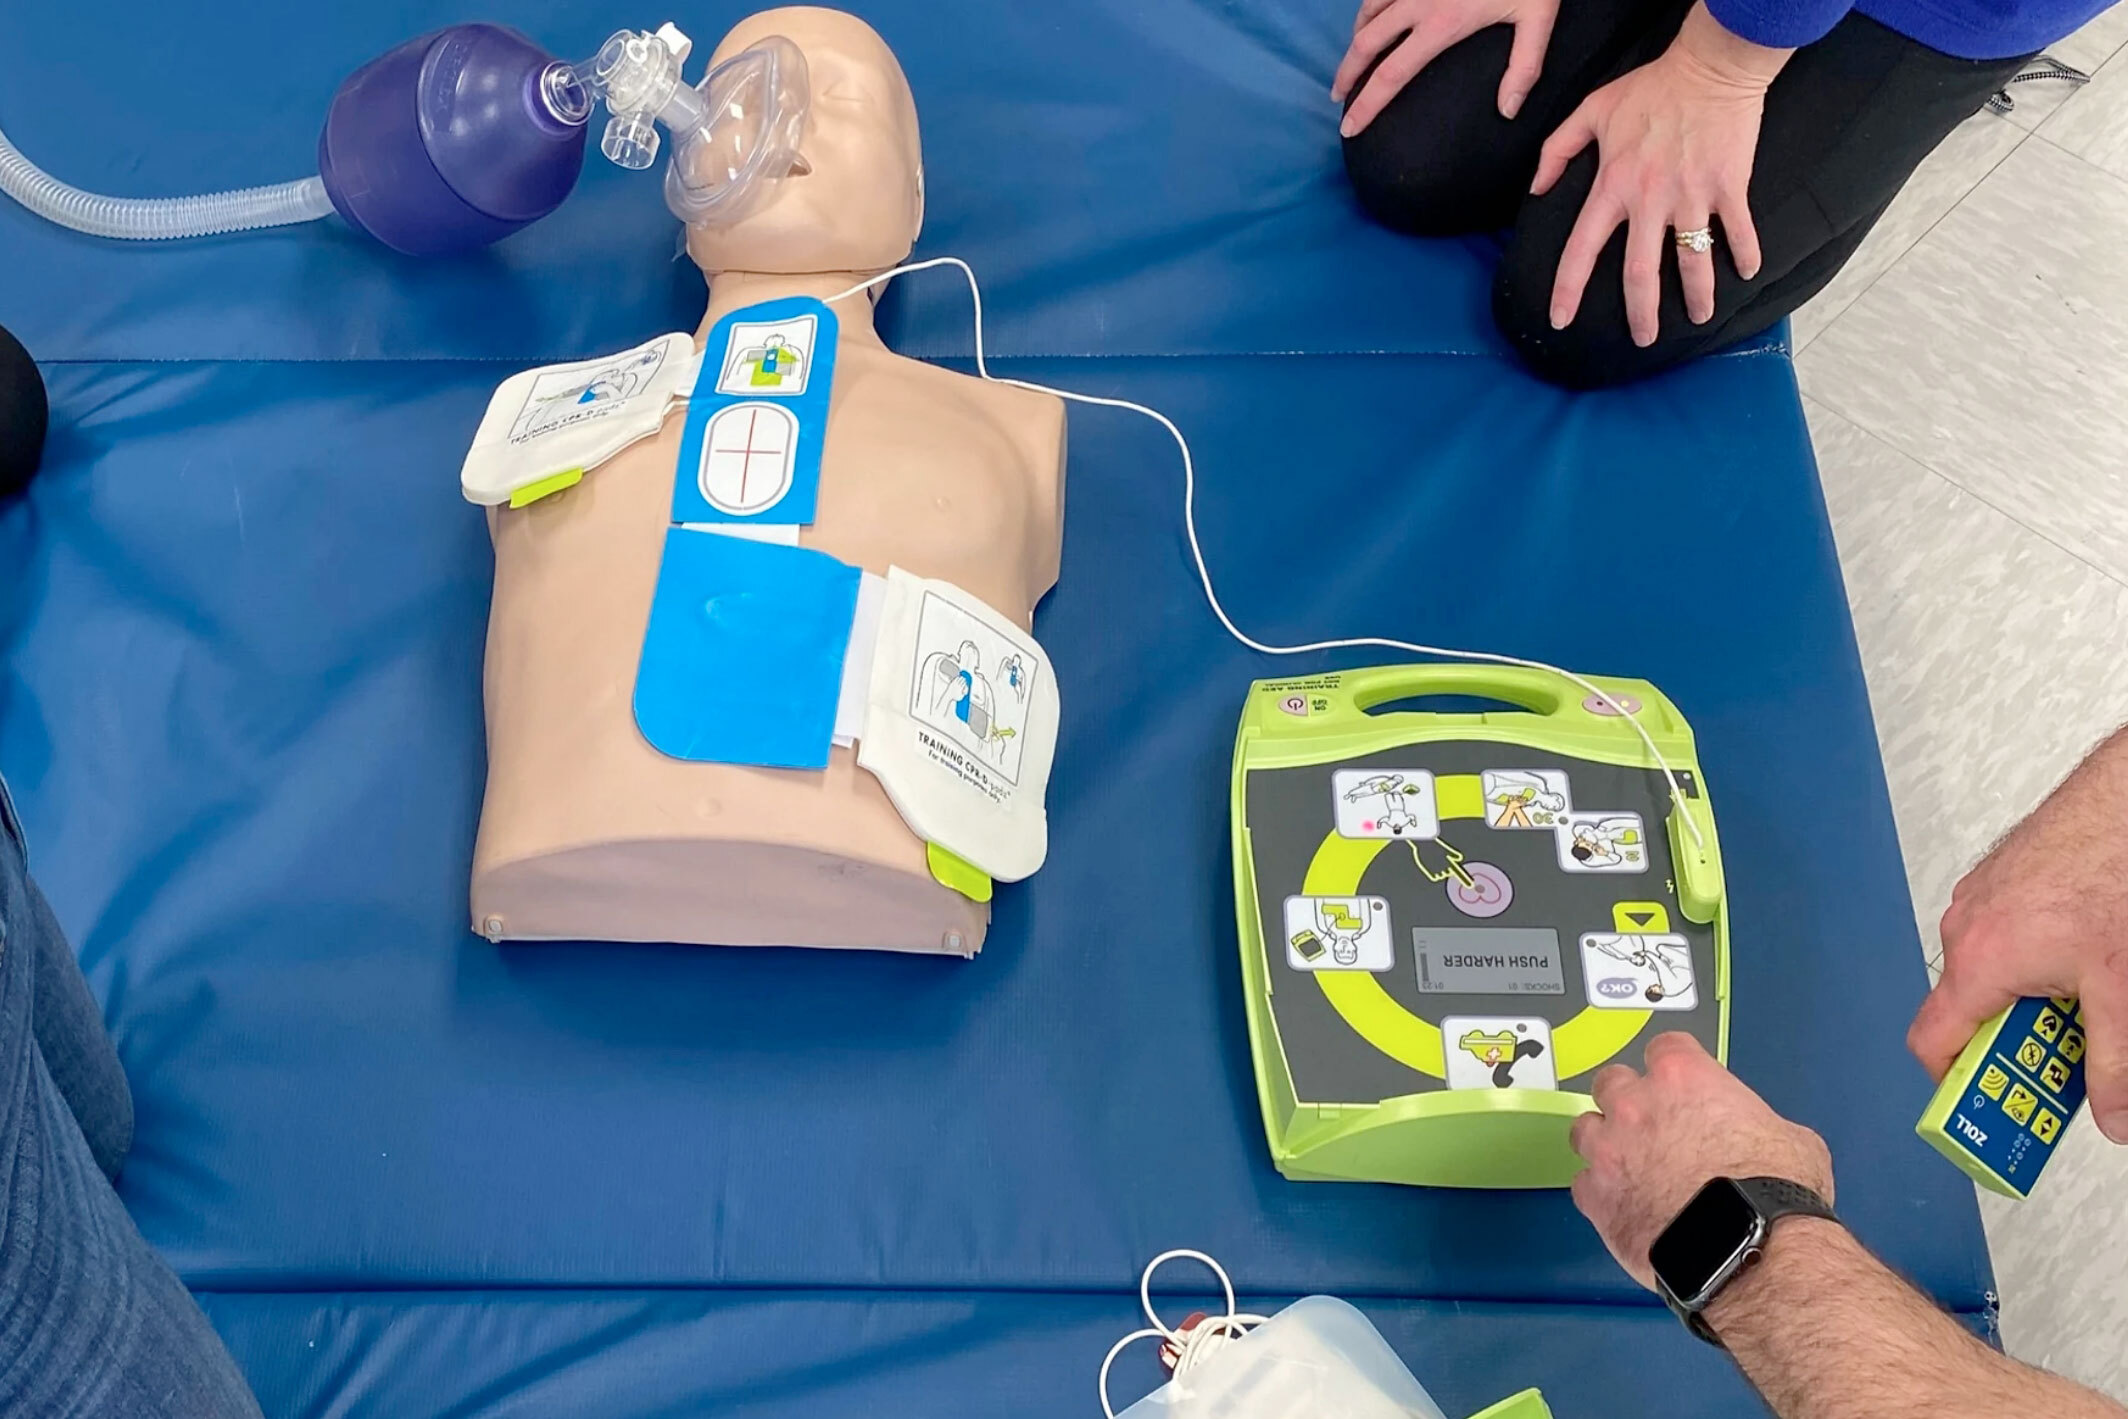 BLS HCP CPR Renewal in Chicago: Trust Chicago’s Pulse for Lifesaving Skills